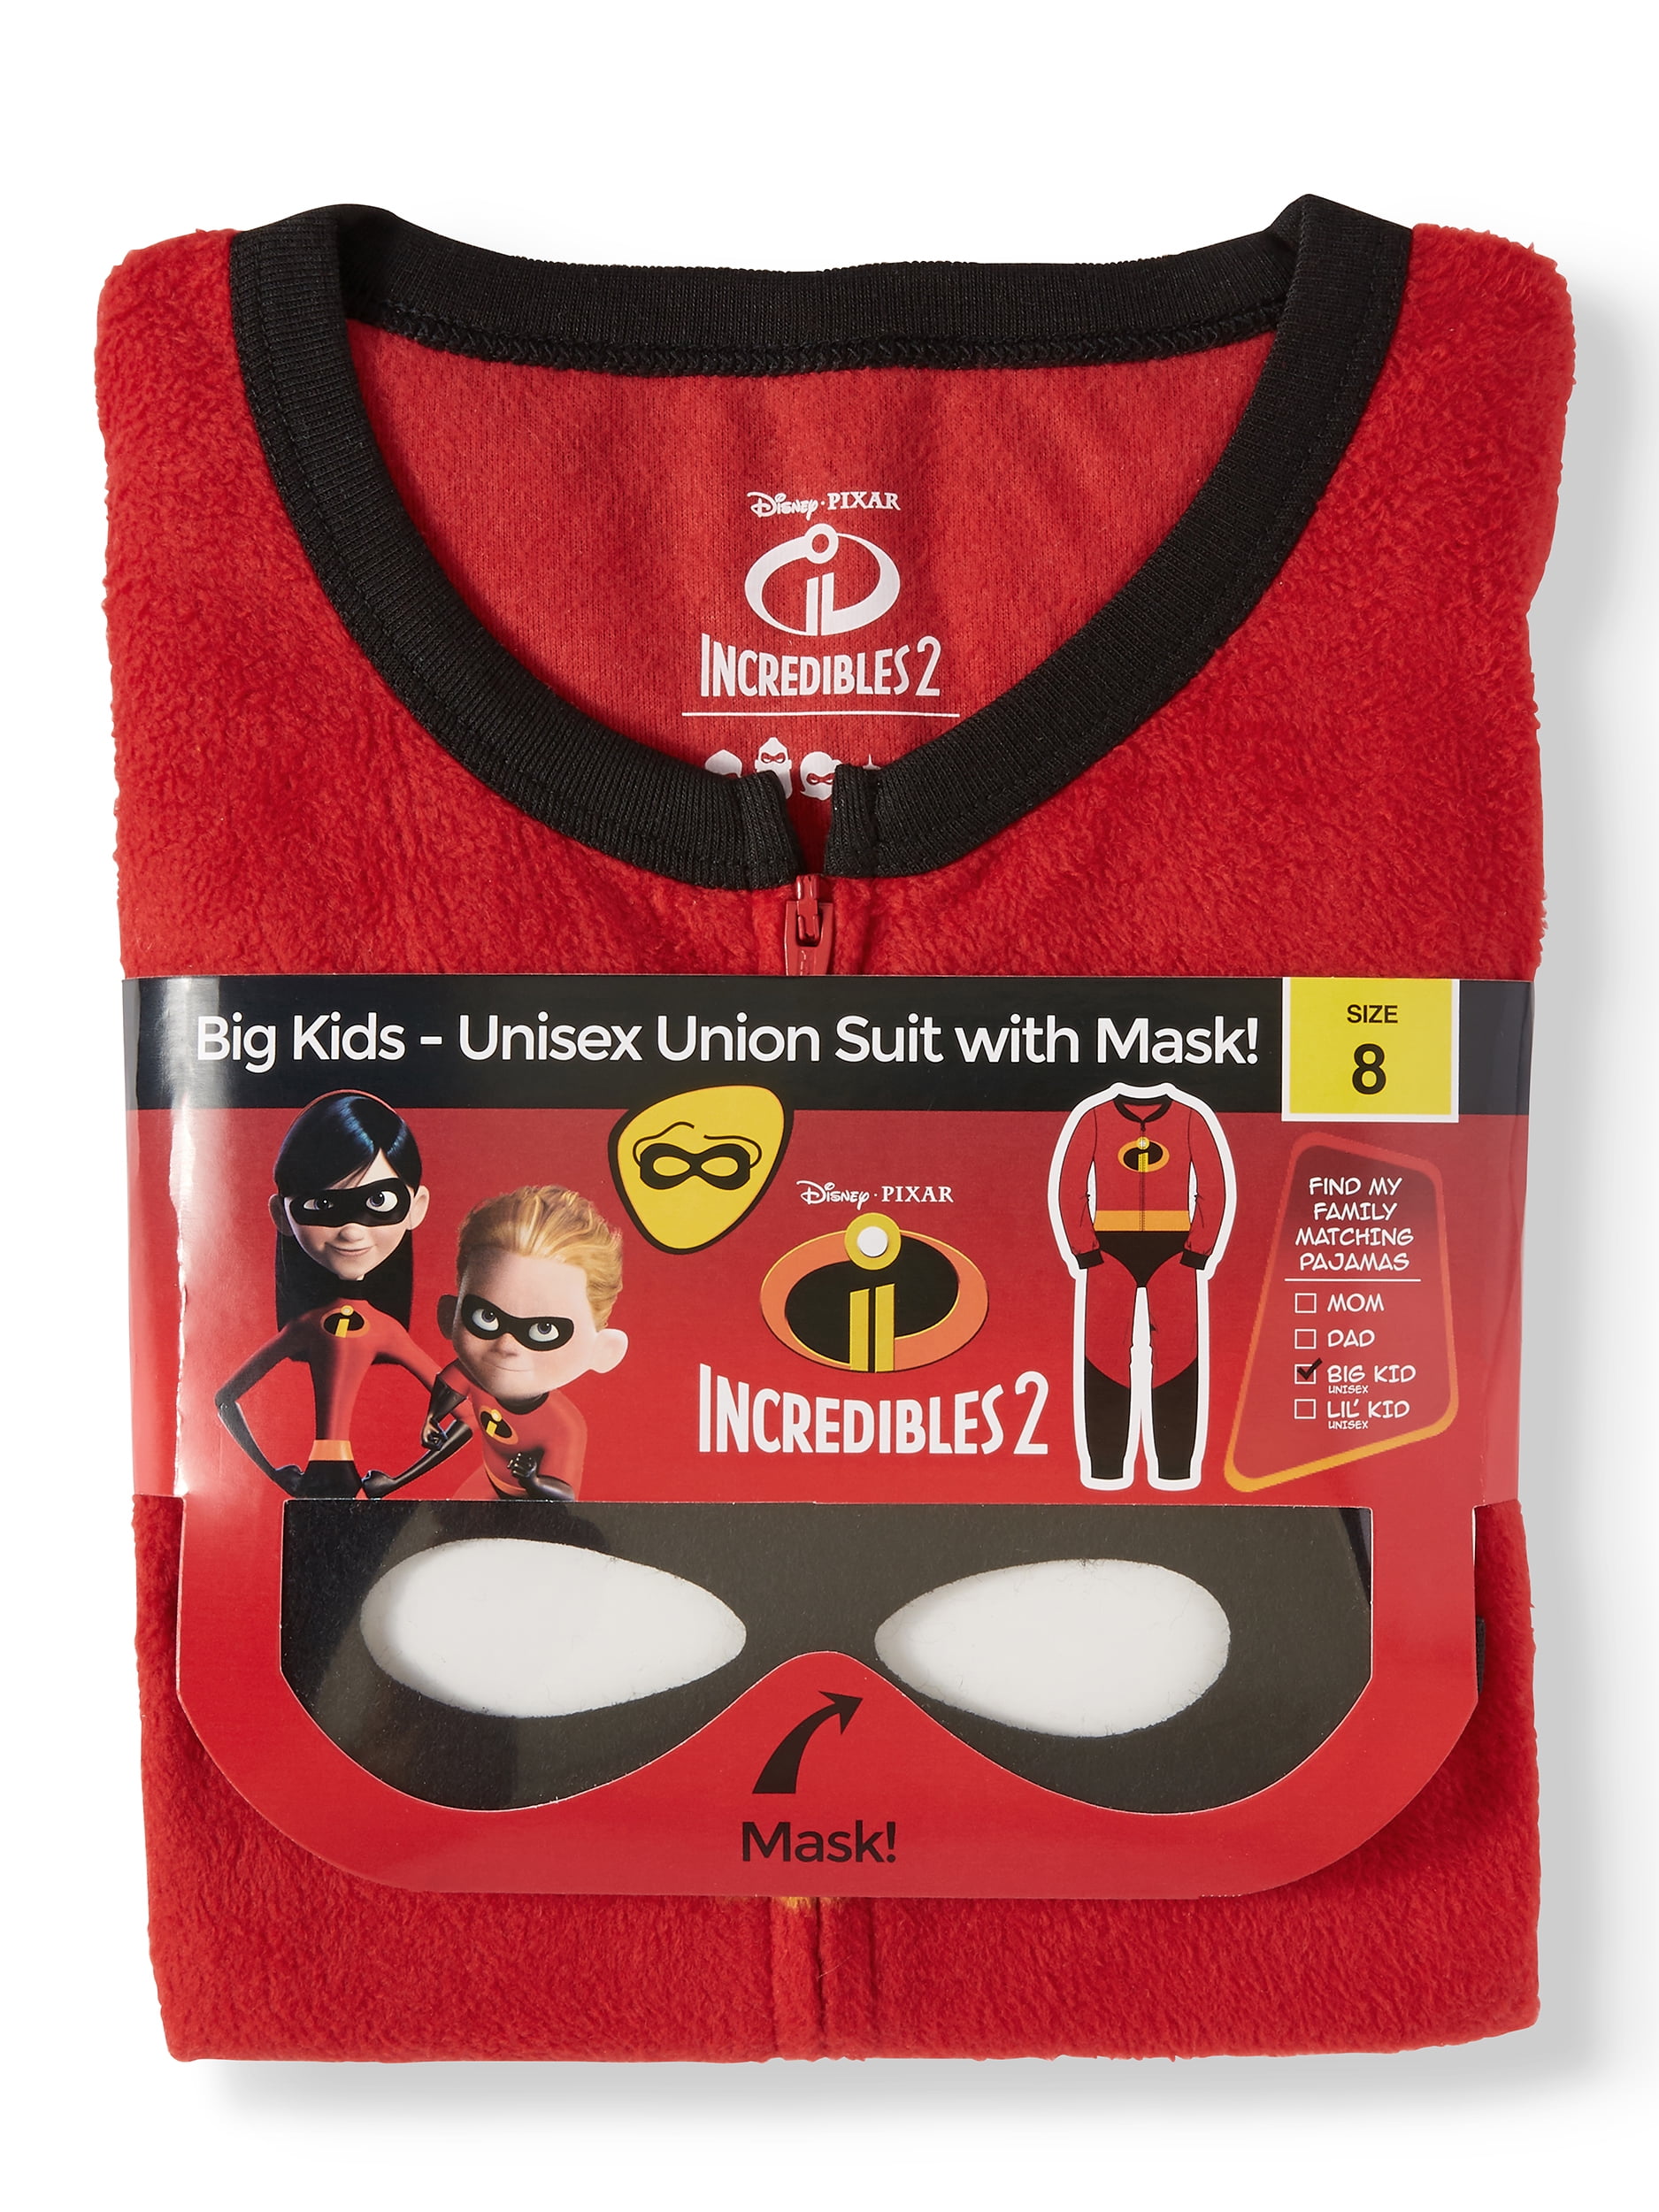 INCREDIBLES 2 SUIT PAJAMAS WITH MASK in Various Sizes 